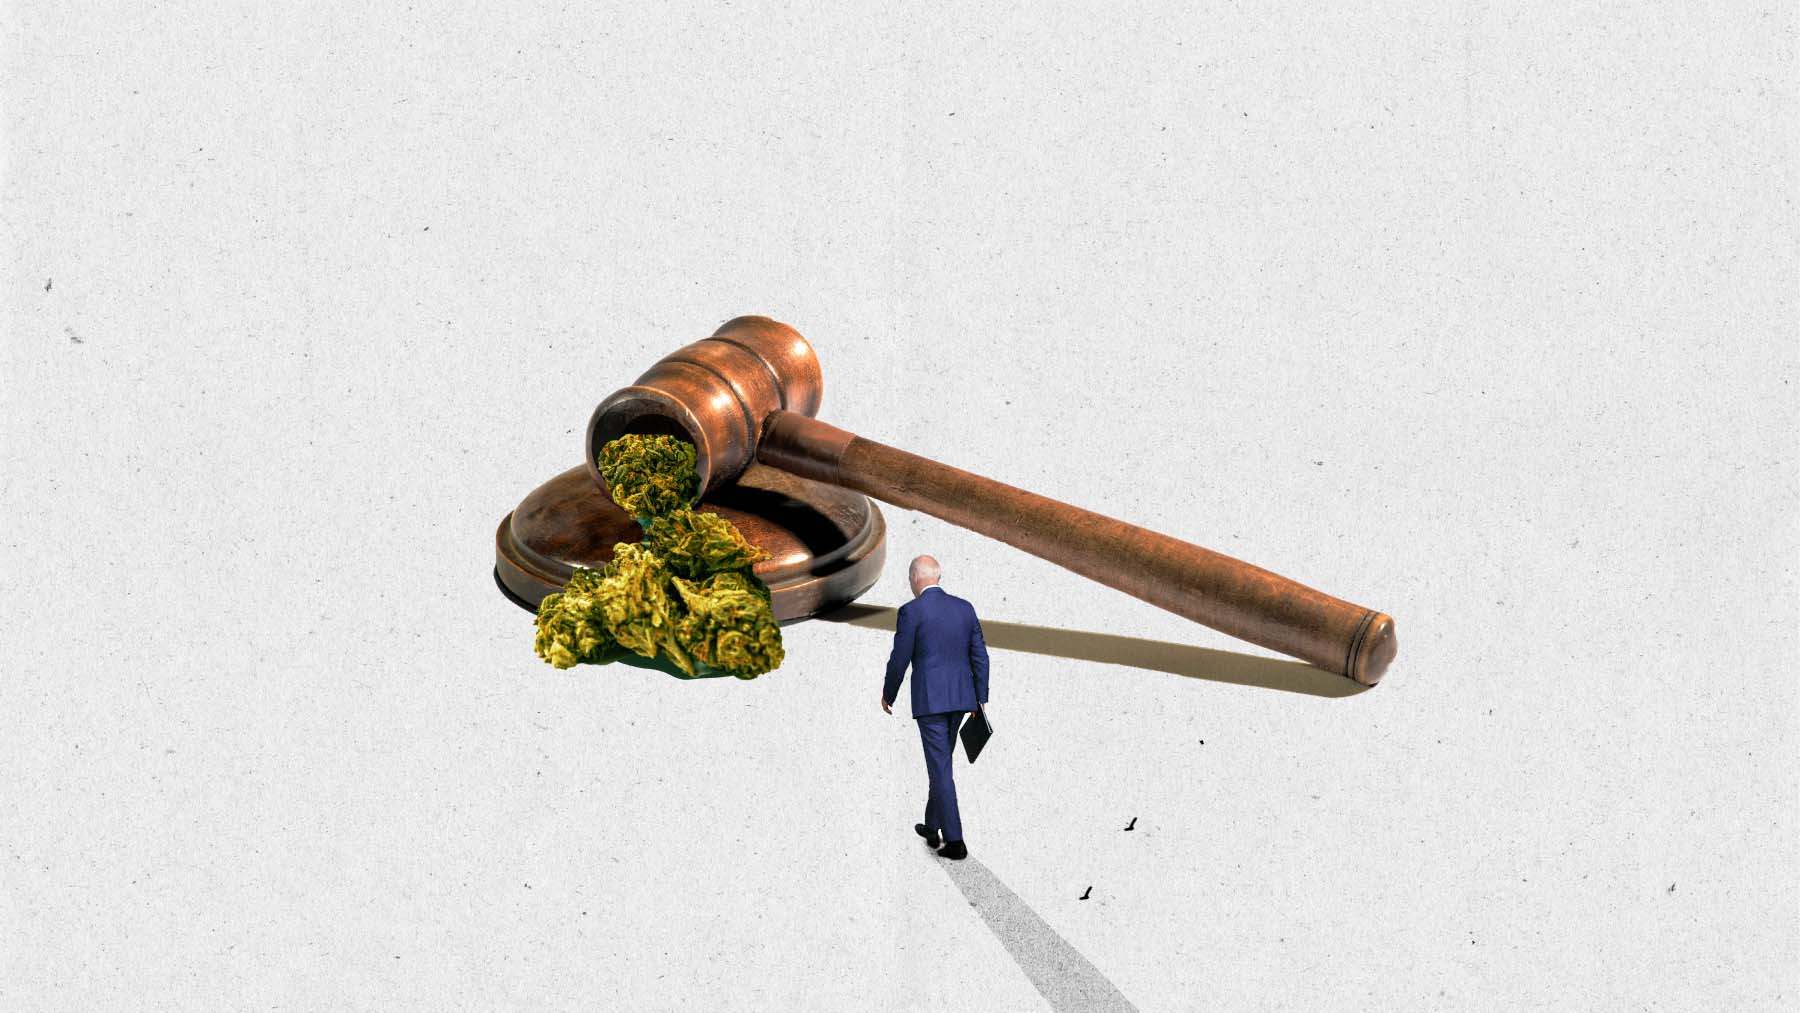 A photo collage of a judge’s gavel, a pile of marijuana, and a tiny figure of a man.